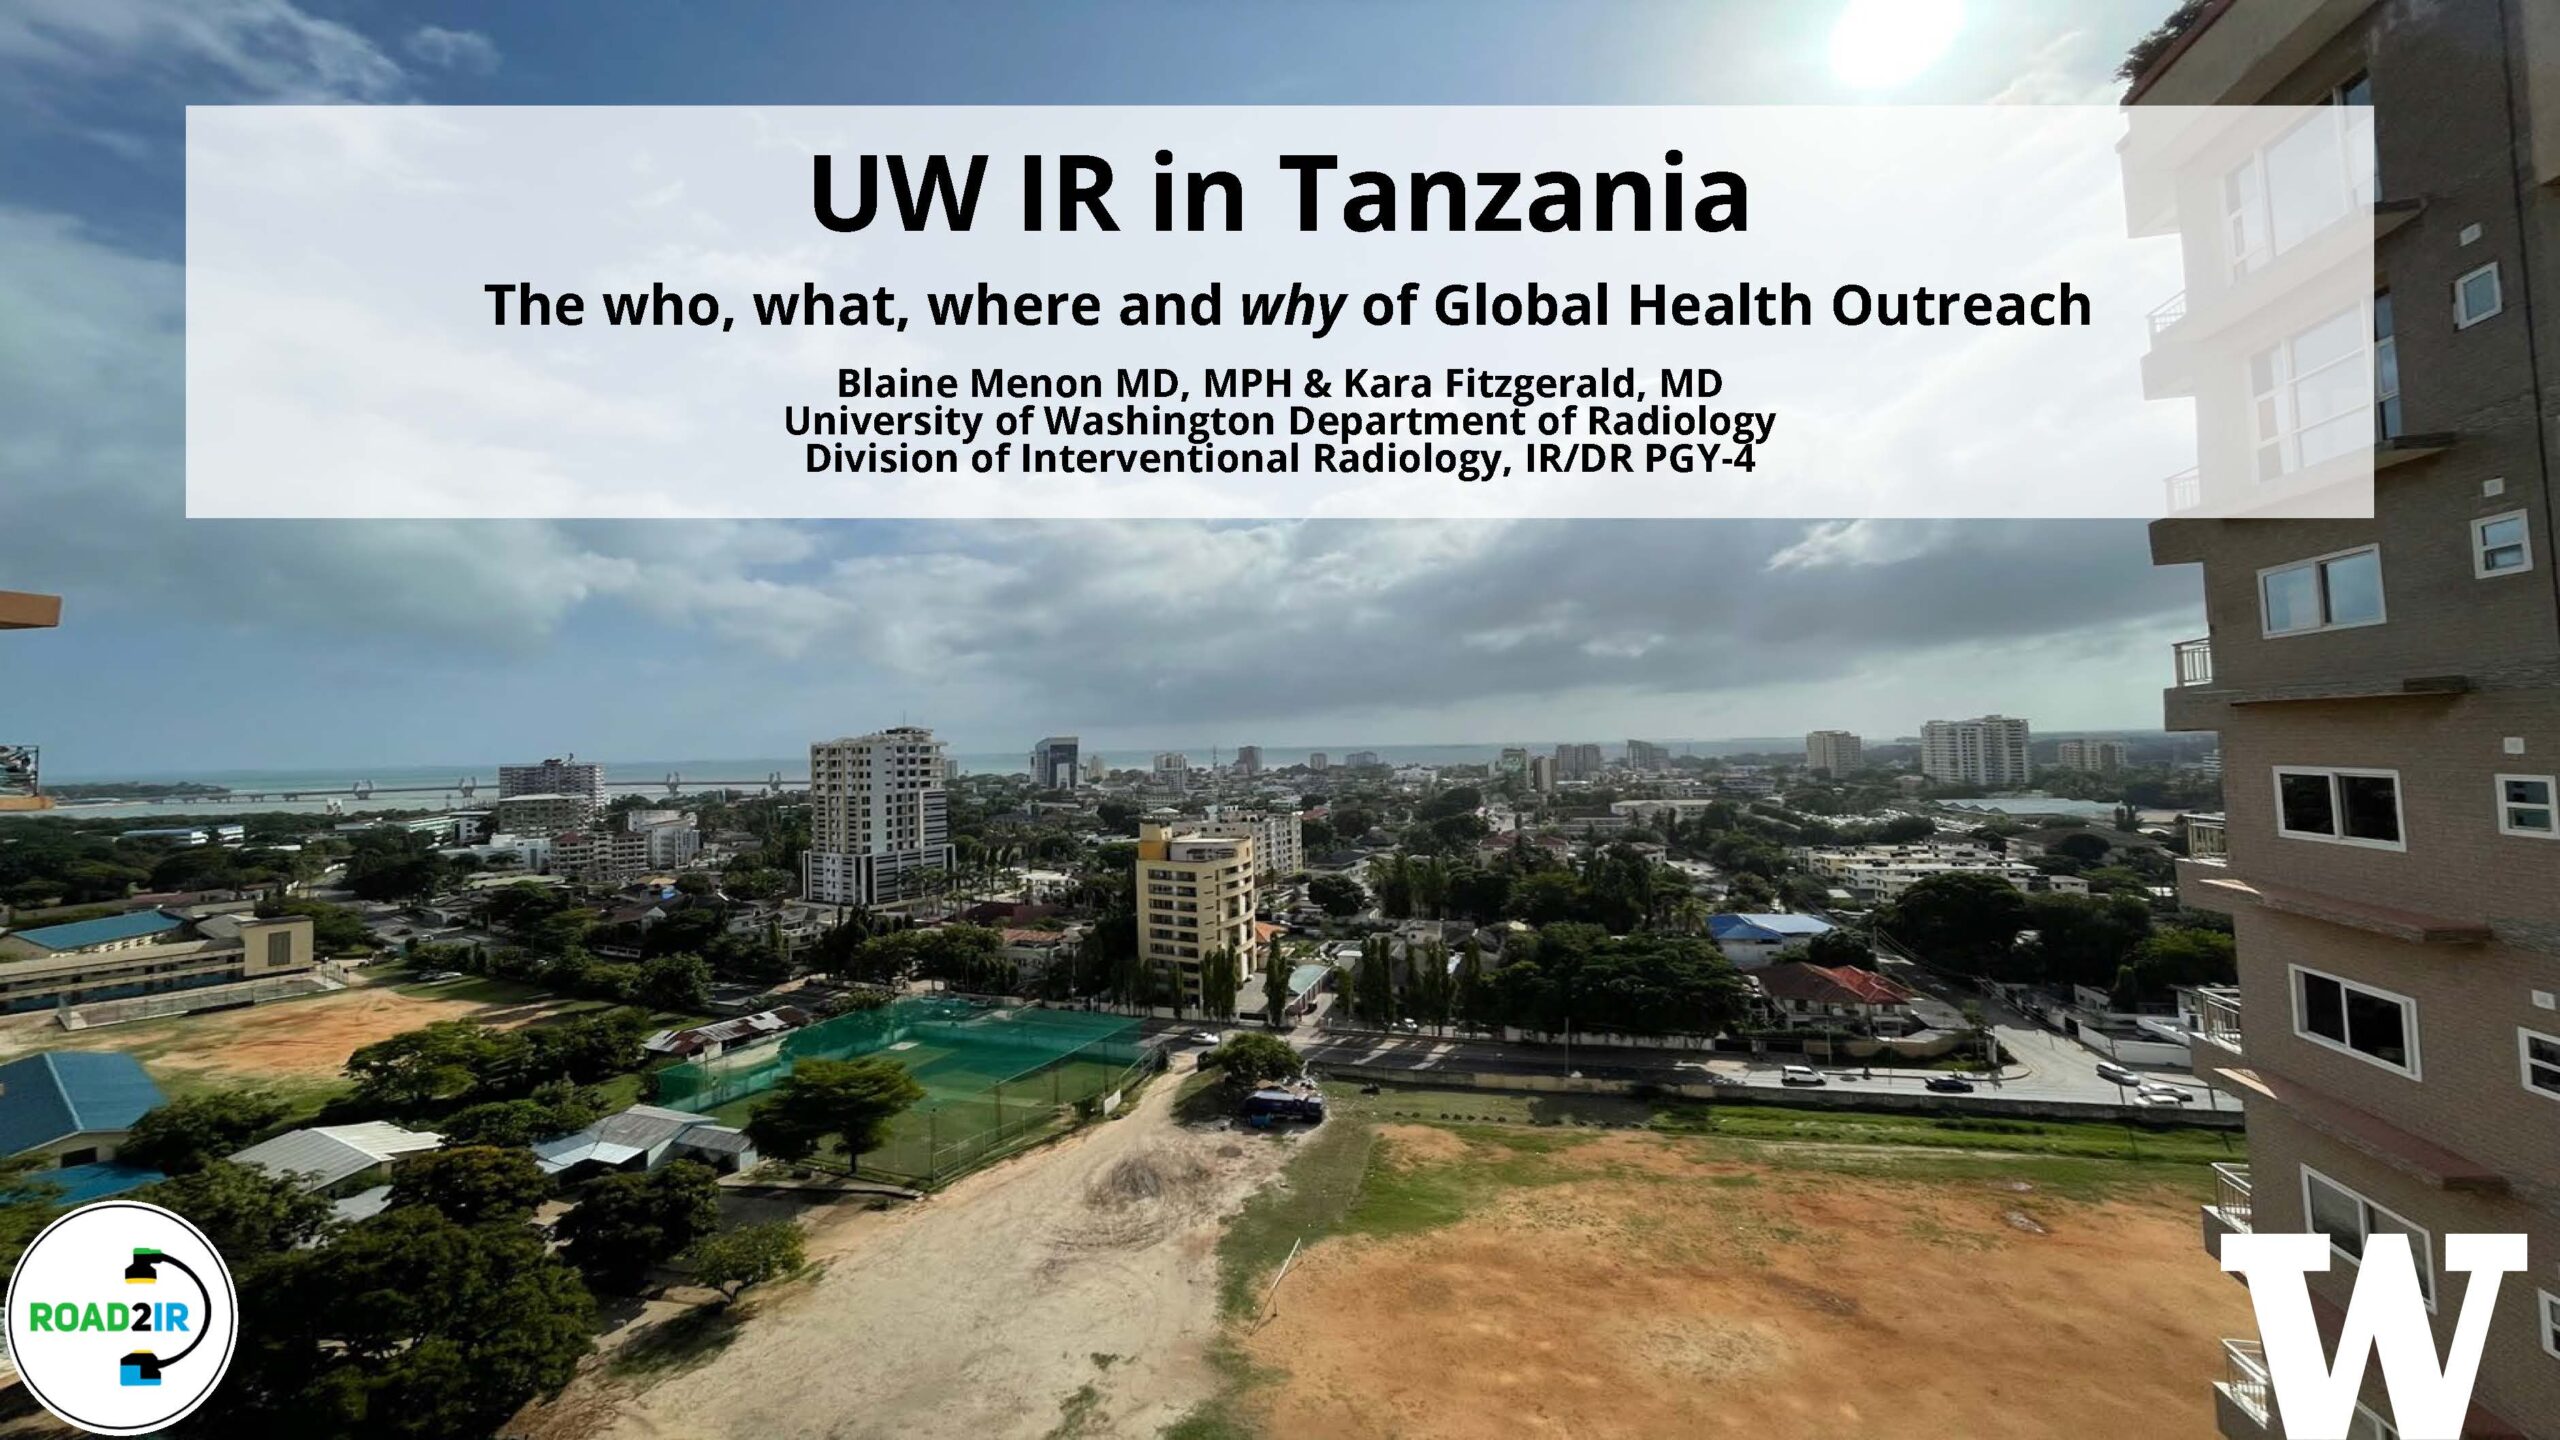 A slide with a Tanzanian city in the background. The text reads: UW IR in Tanzania; the who, what where and why of Global Health Outreach plus the names and titles of the participants.